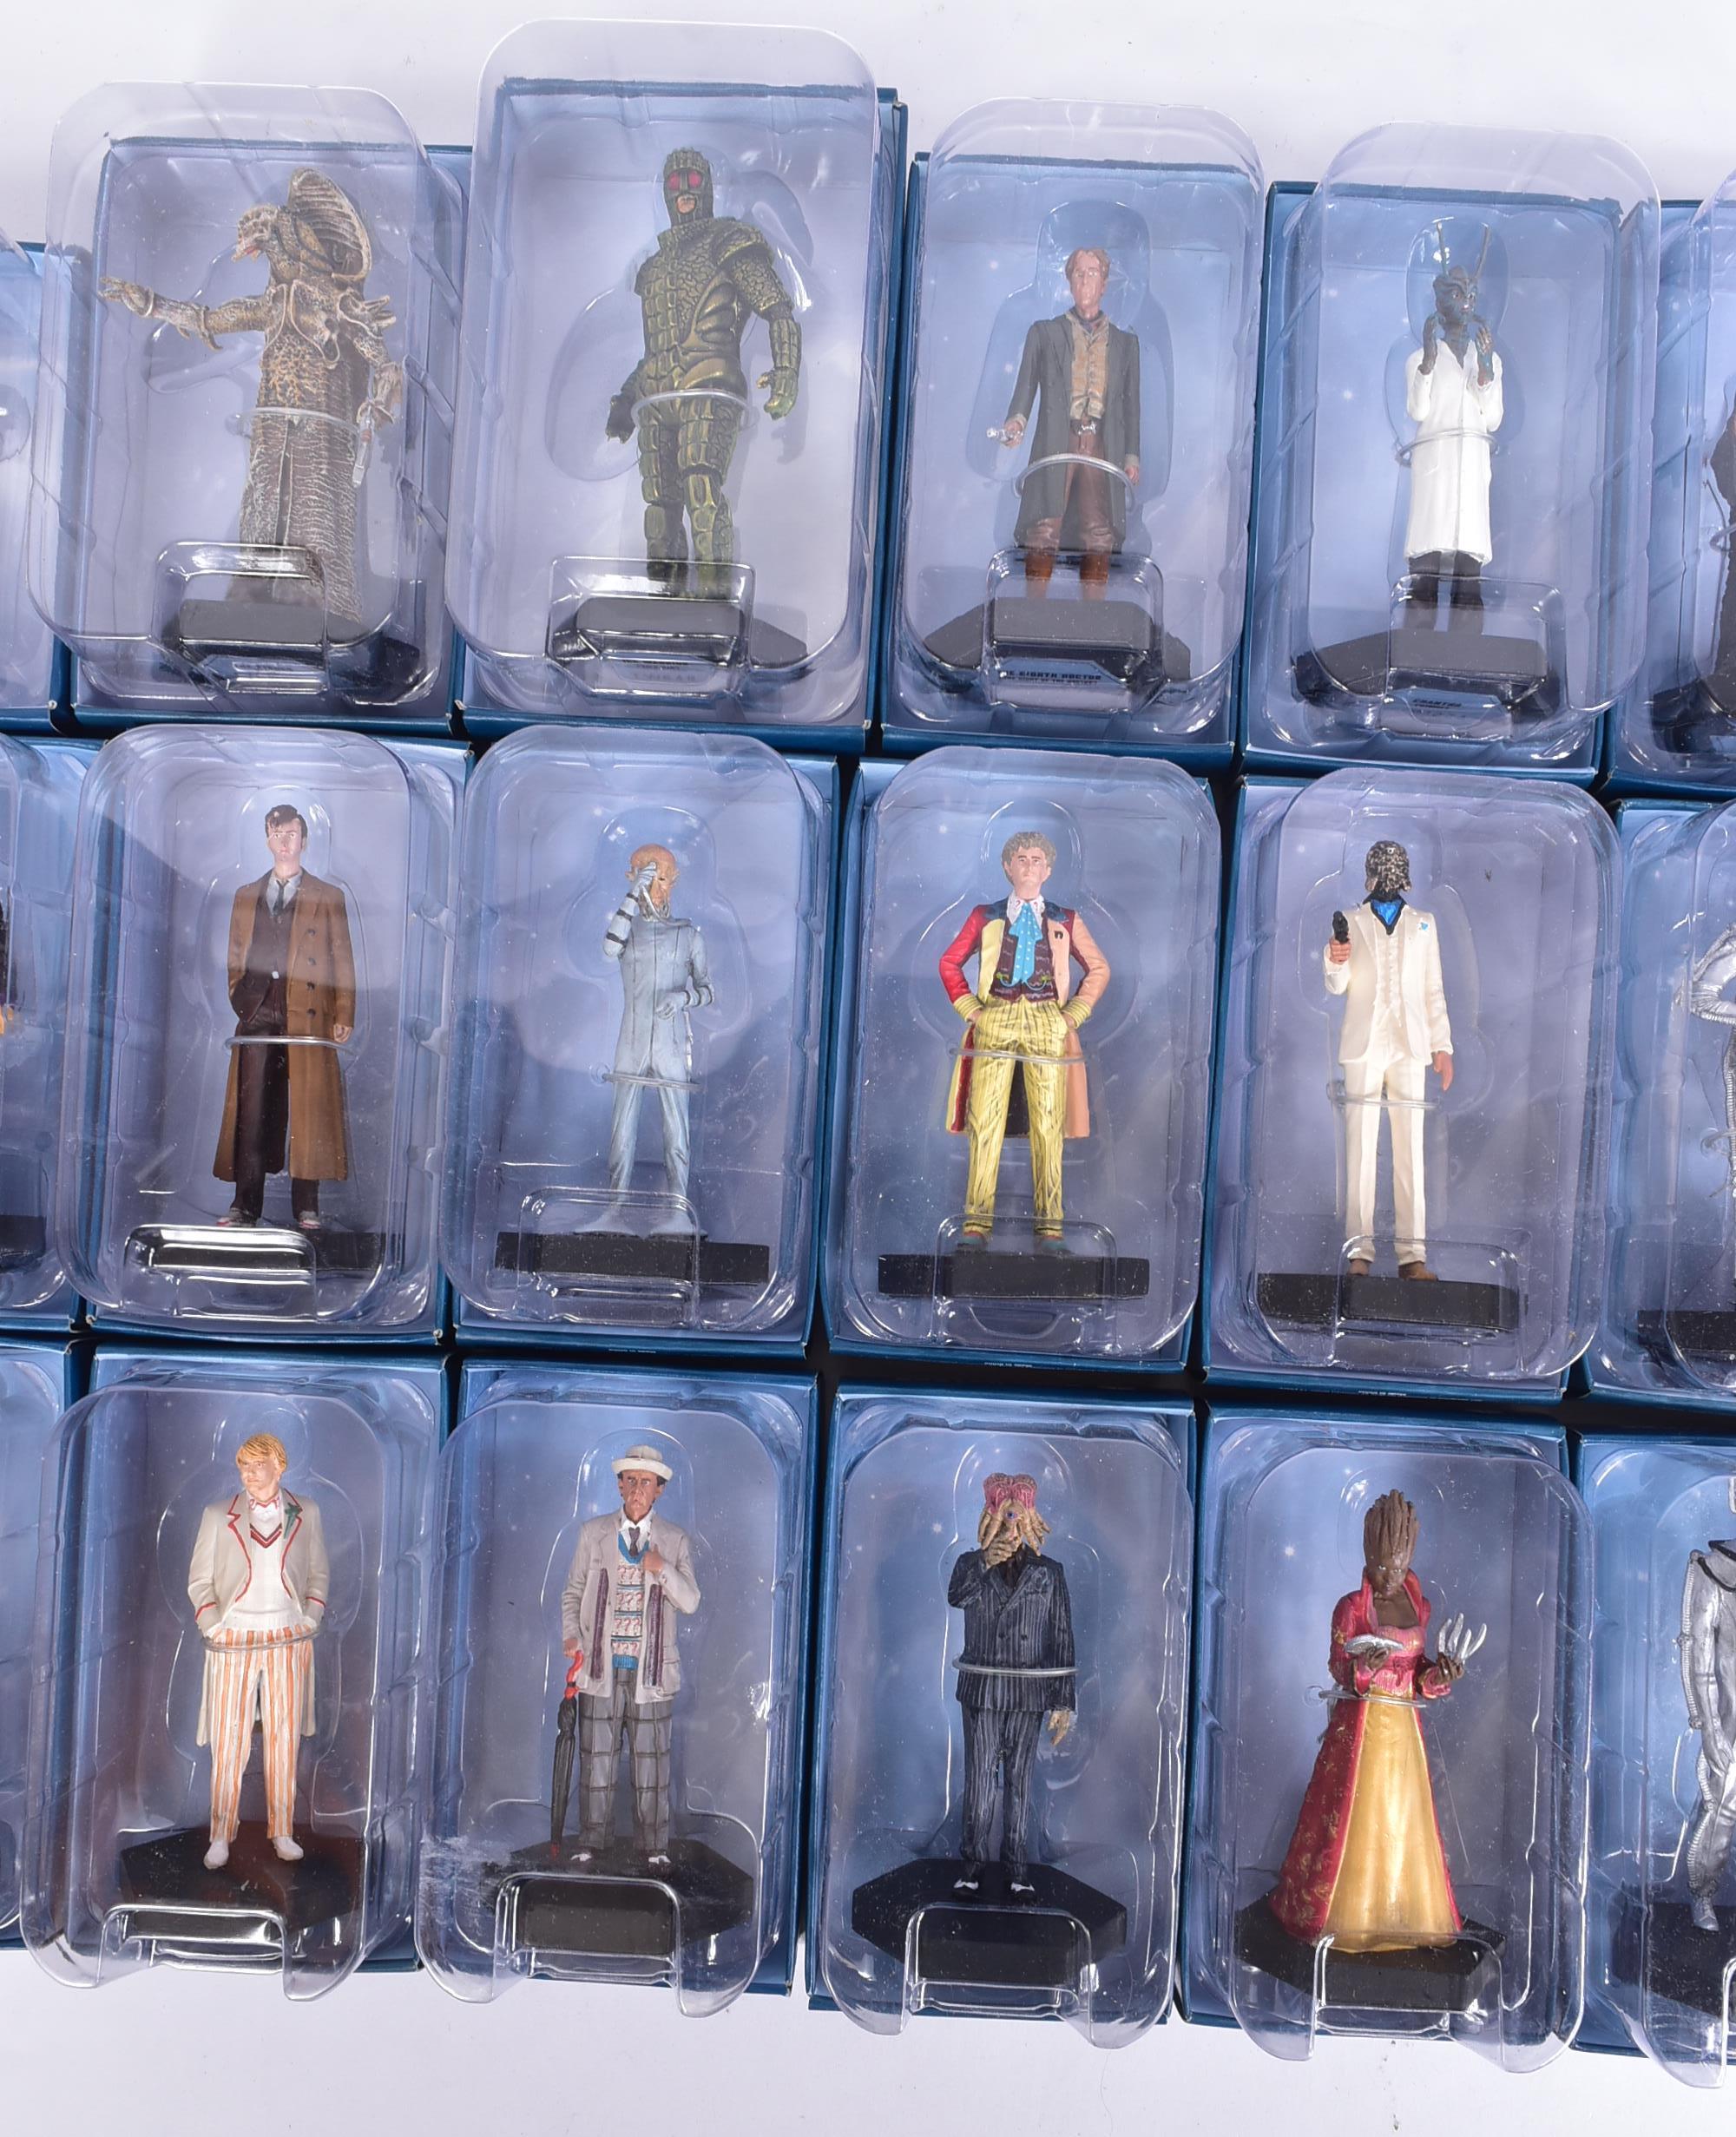 DOCTOR WHO - EAGLEMOSS - RESIN DIECAST FIGURINES - Image 3 of 5